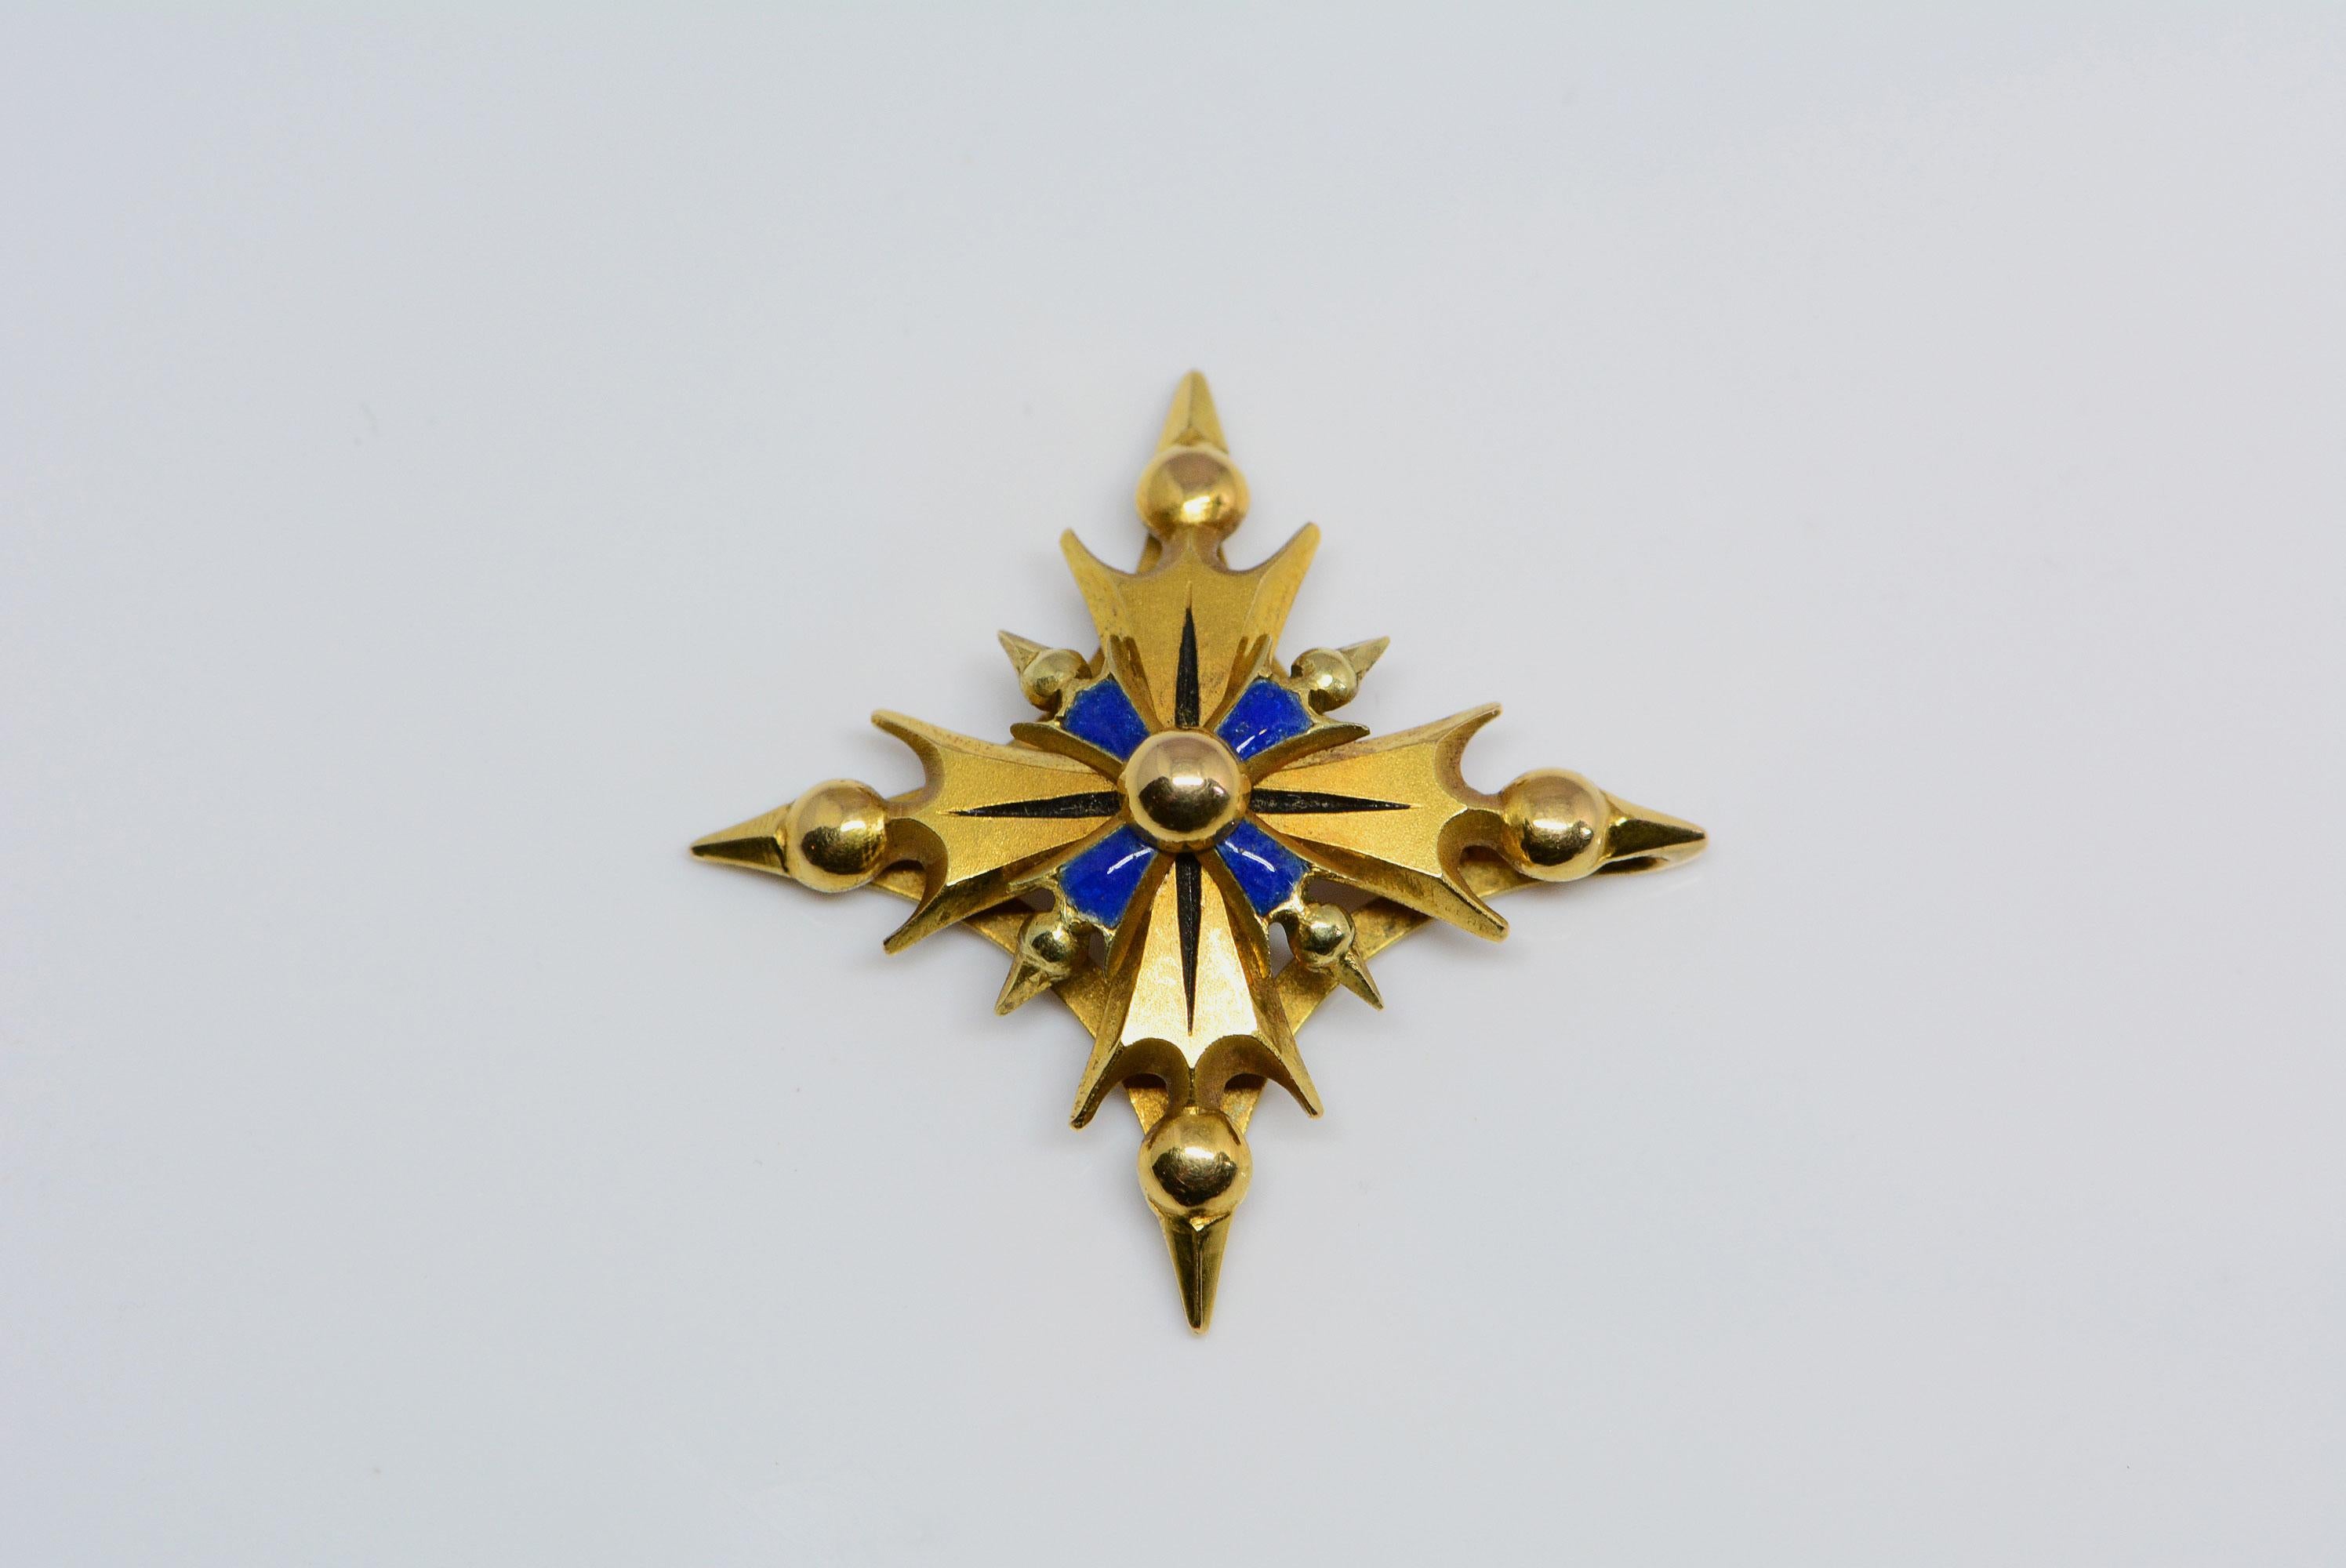 
This pendant has blue enamelling that has been applied on top of 14 karat yellow gold. We believe it is in the form of a stylized maltese cross. 
There is a spot on the back where you can thread a necklace through and wear it as a pendant.
This